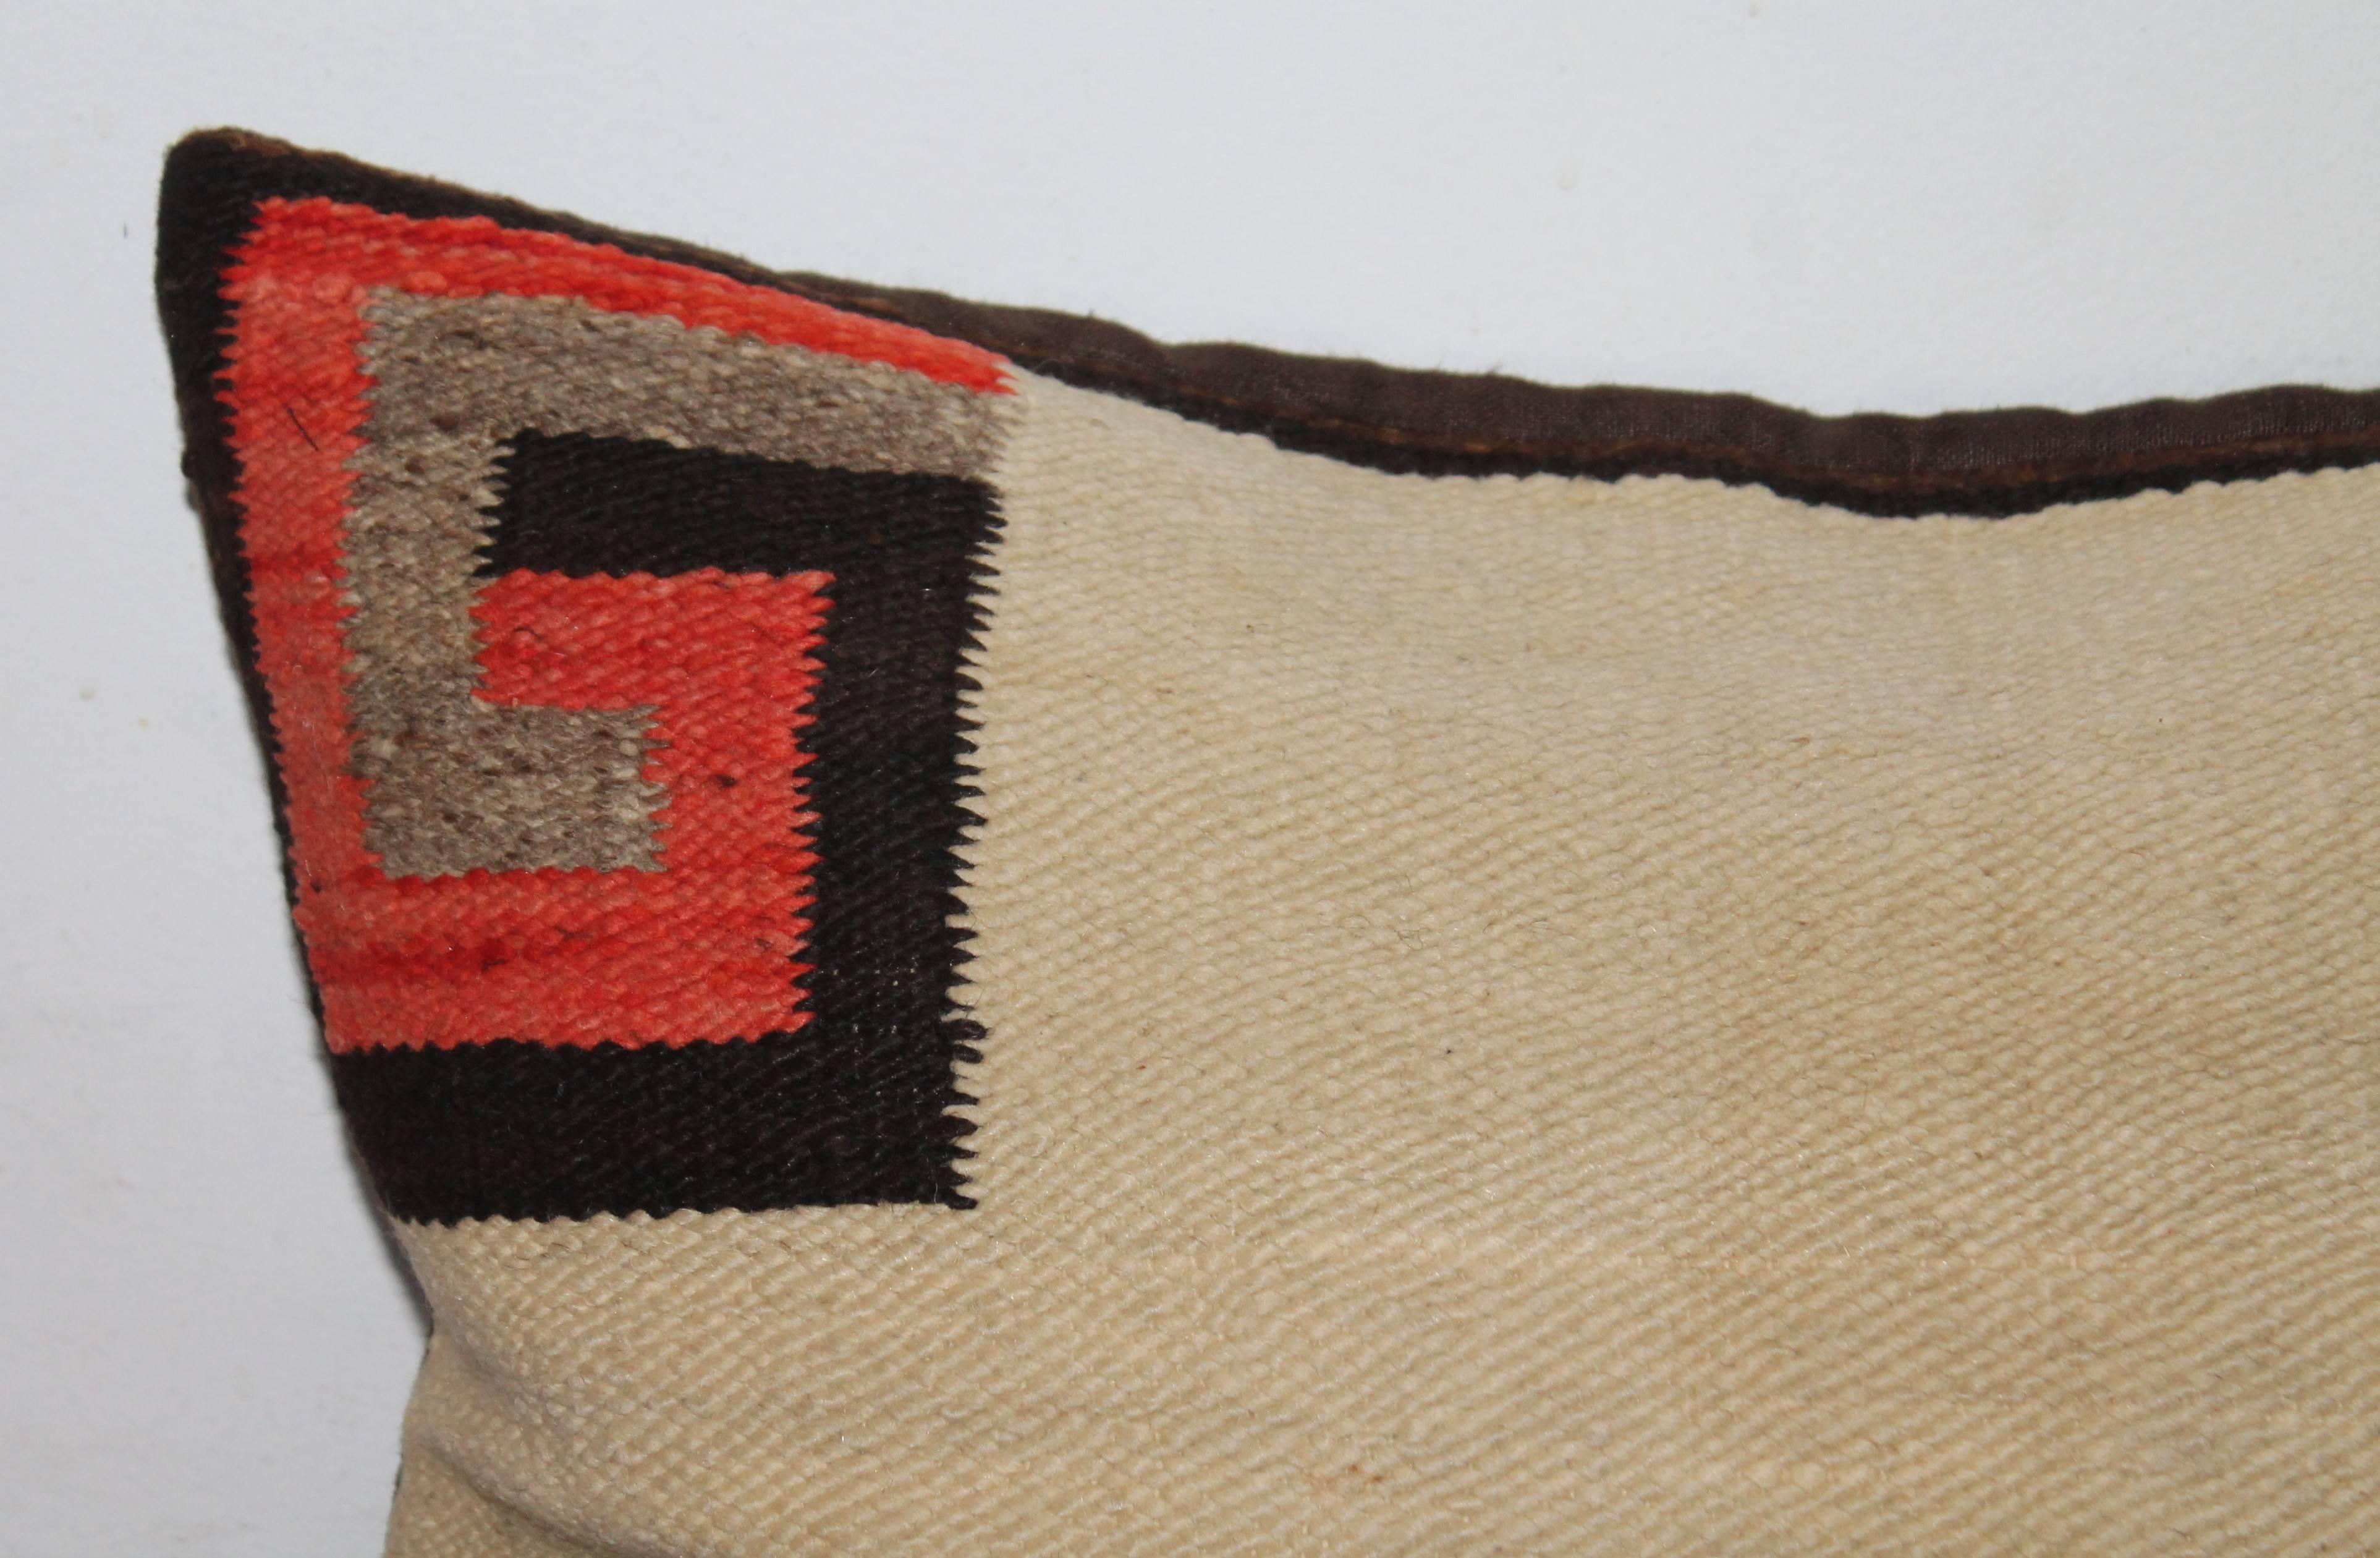 This transitional Navajo saddle blanket weaving is in good condition has a brown cotton linen backing. This is the entire saddle blanket. A fine early example of a saddle blanket. The backing is in brown cotton linen.